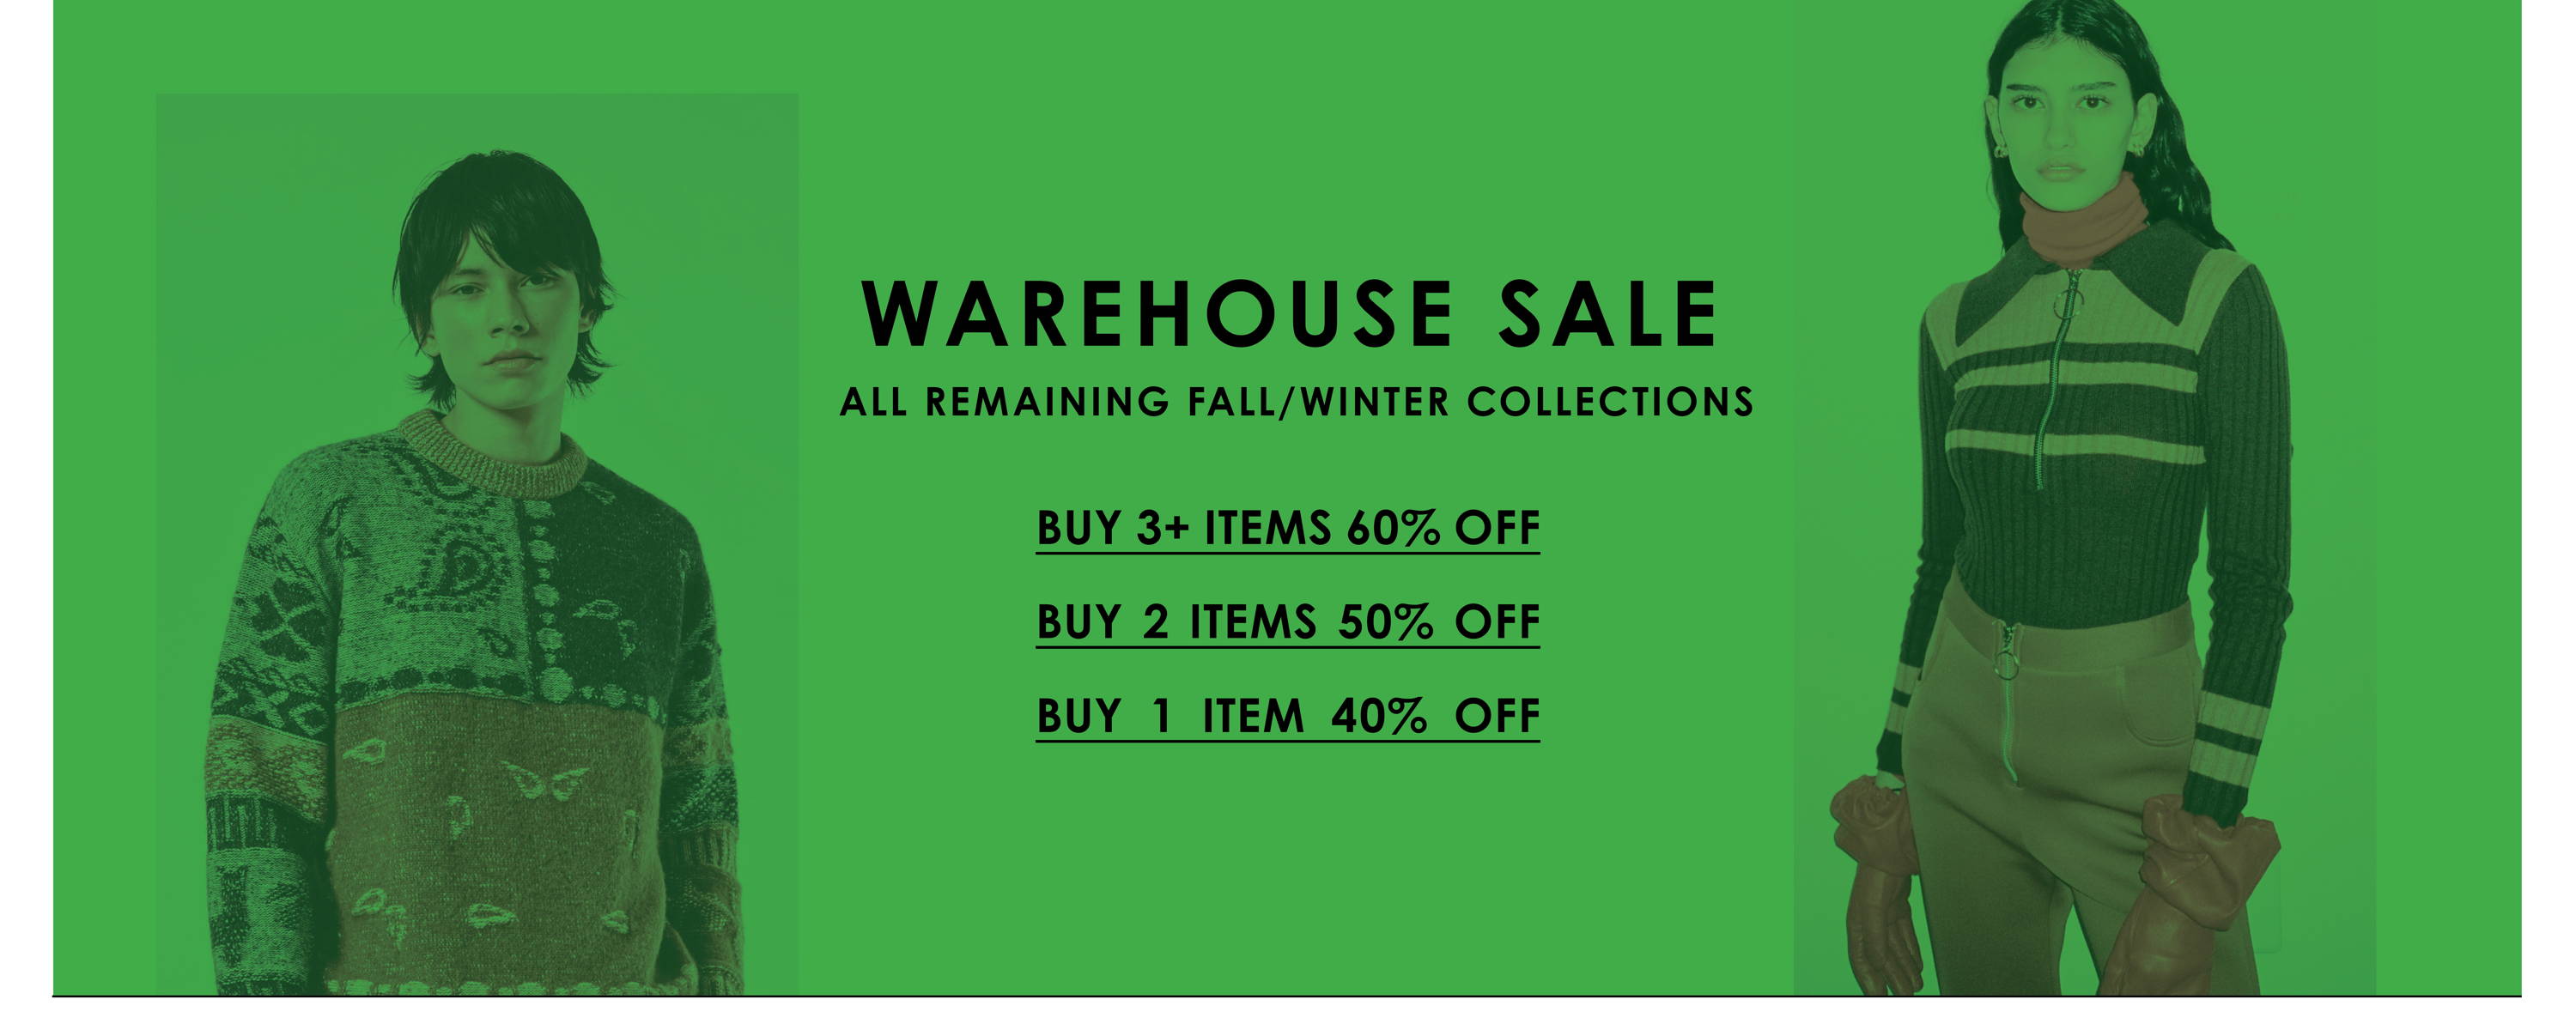 Warehouse Sale - Up to 60% Off